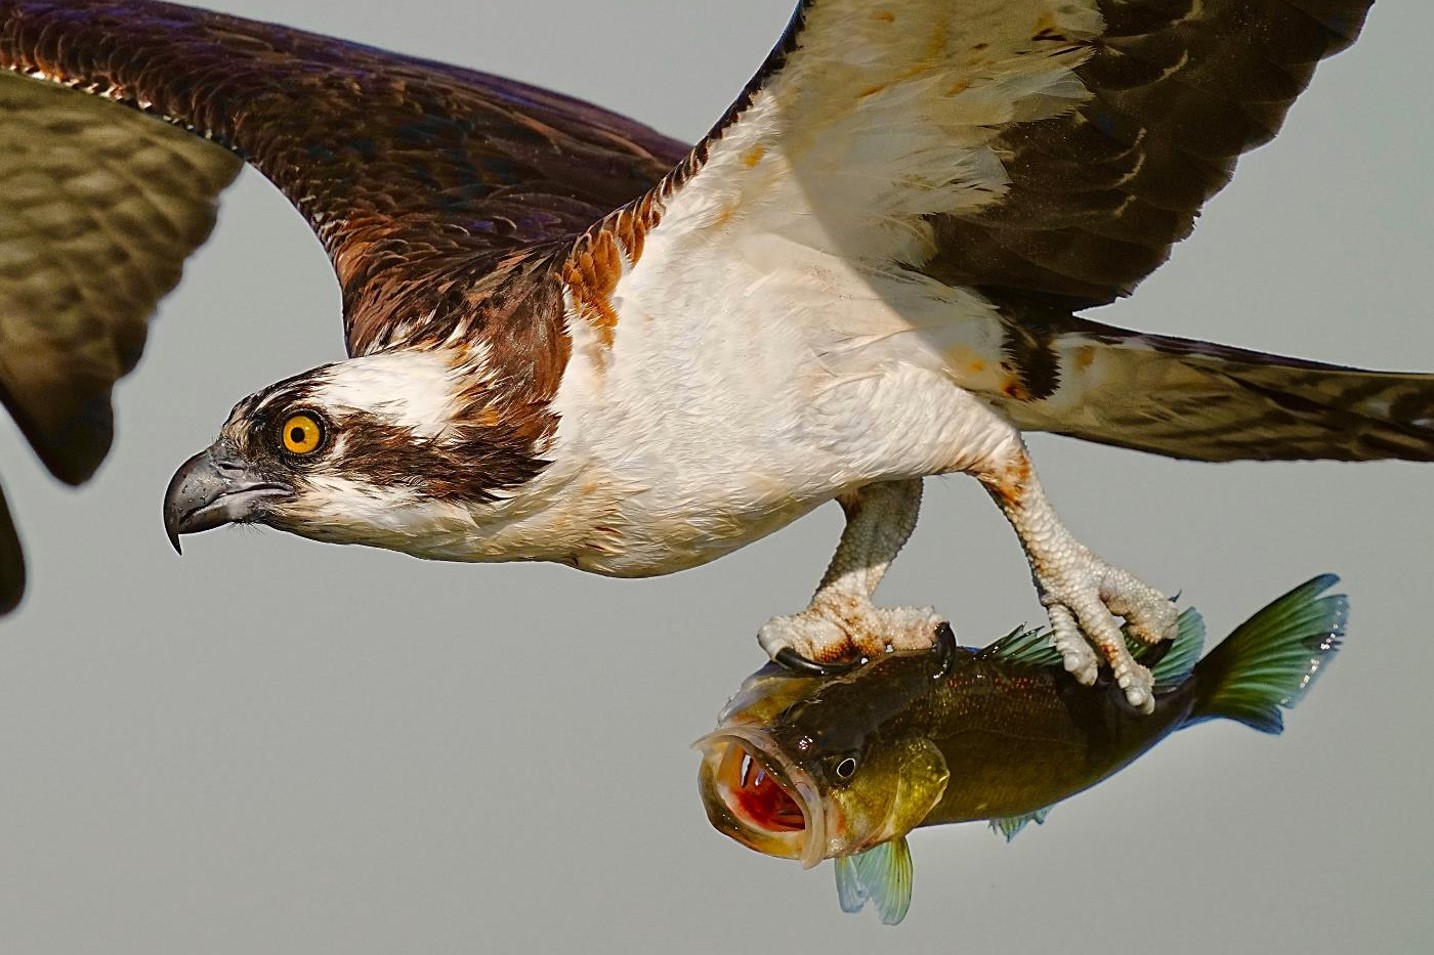 "Osprey with a Surprised Largemouth Bass" Advanced 3rd Place: Wei-Shen Chin, Windermere